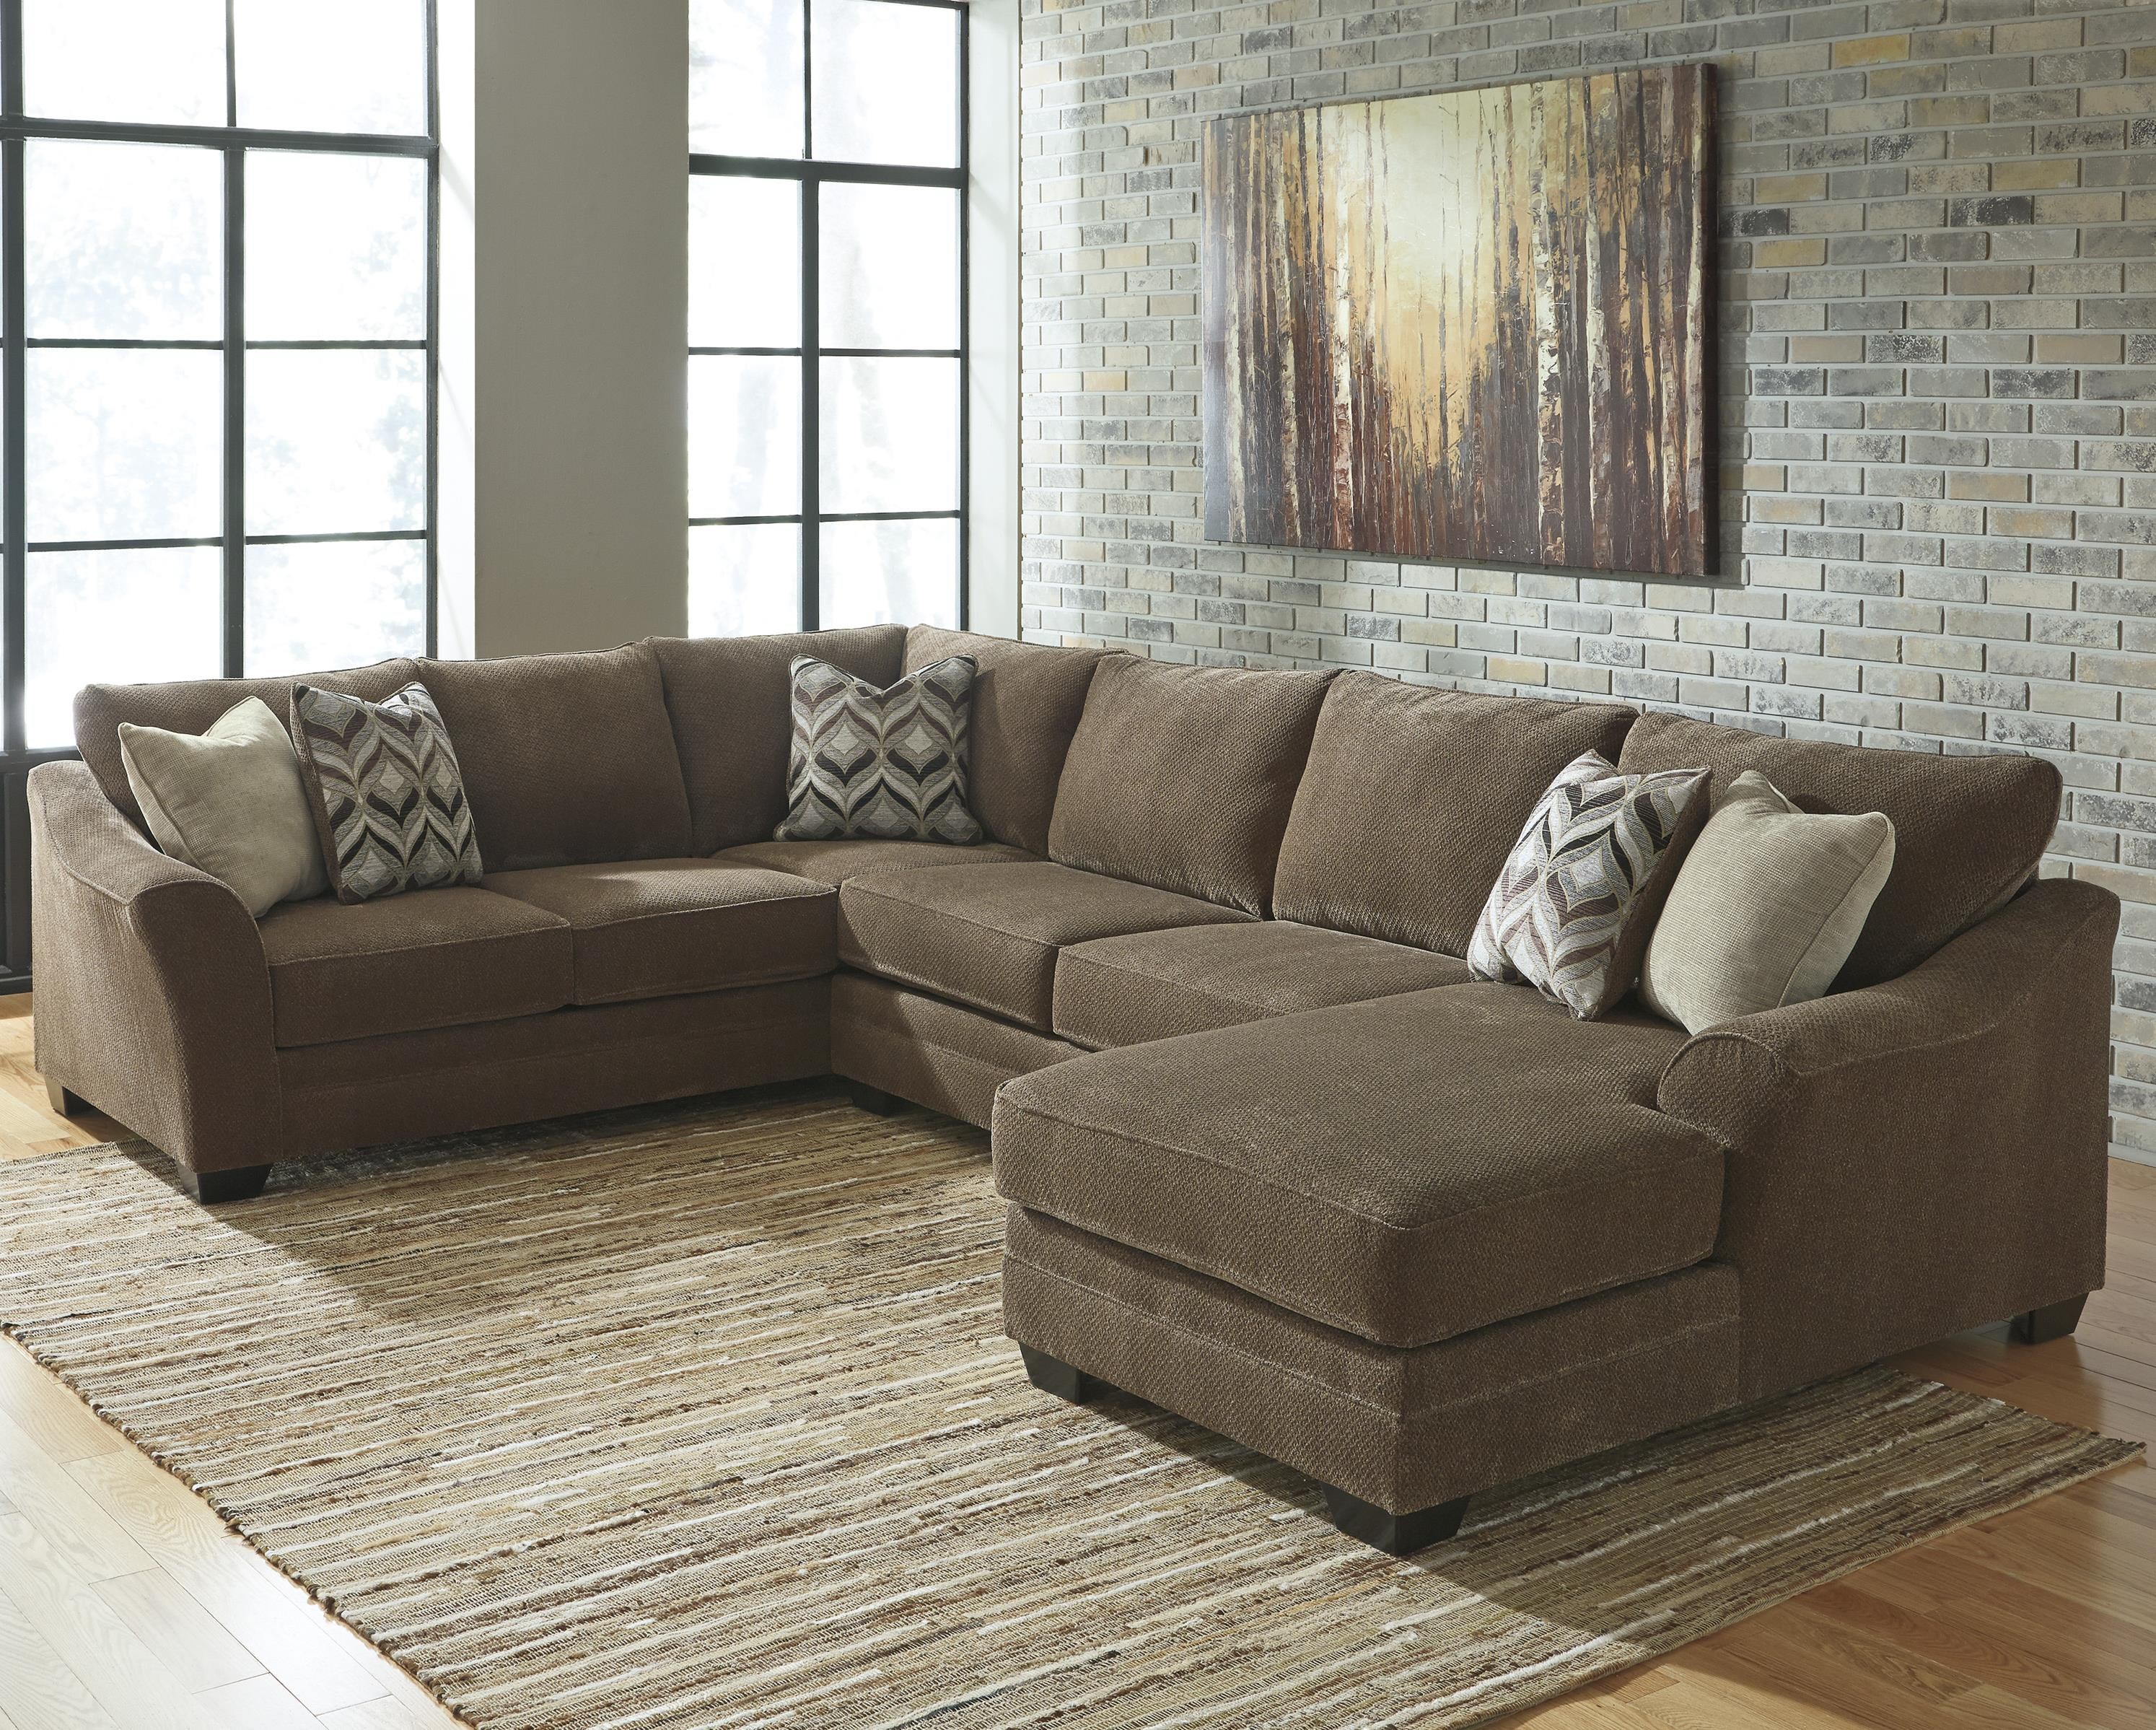 3 piece sectional sofa benchcraft justyna contemporary 3-piece sectional with right chaise JMUKONF